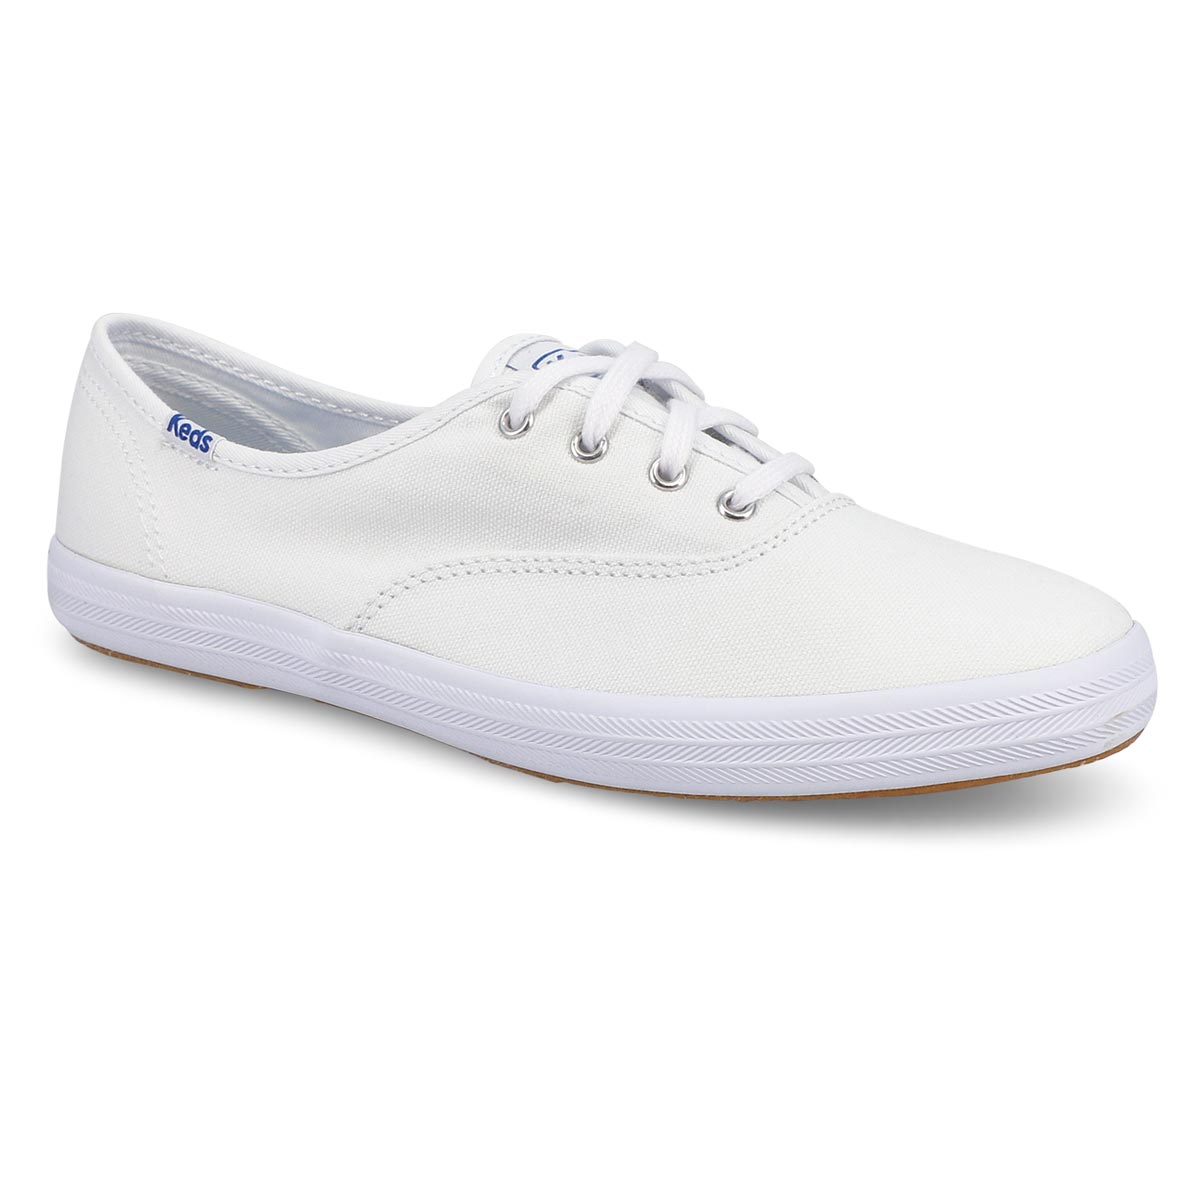 keds champion oxford canvas sneaker